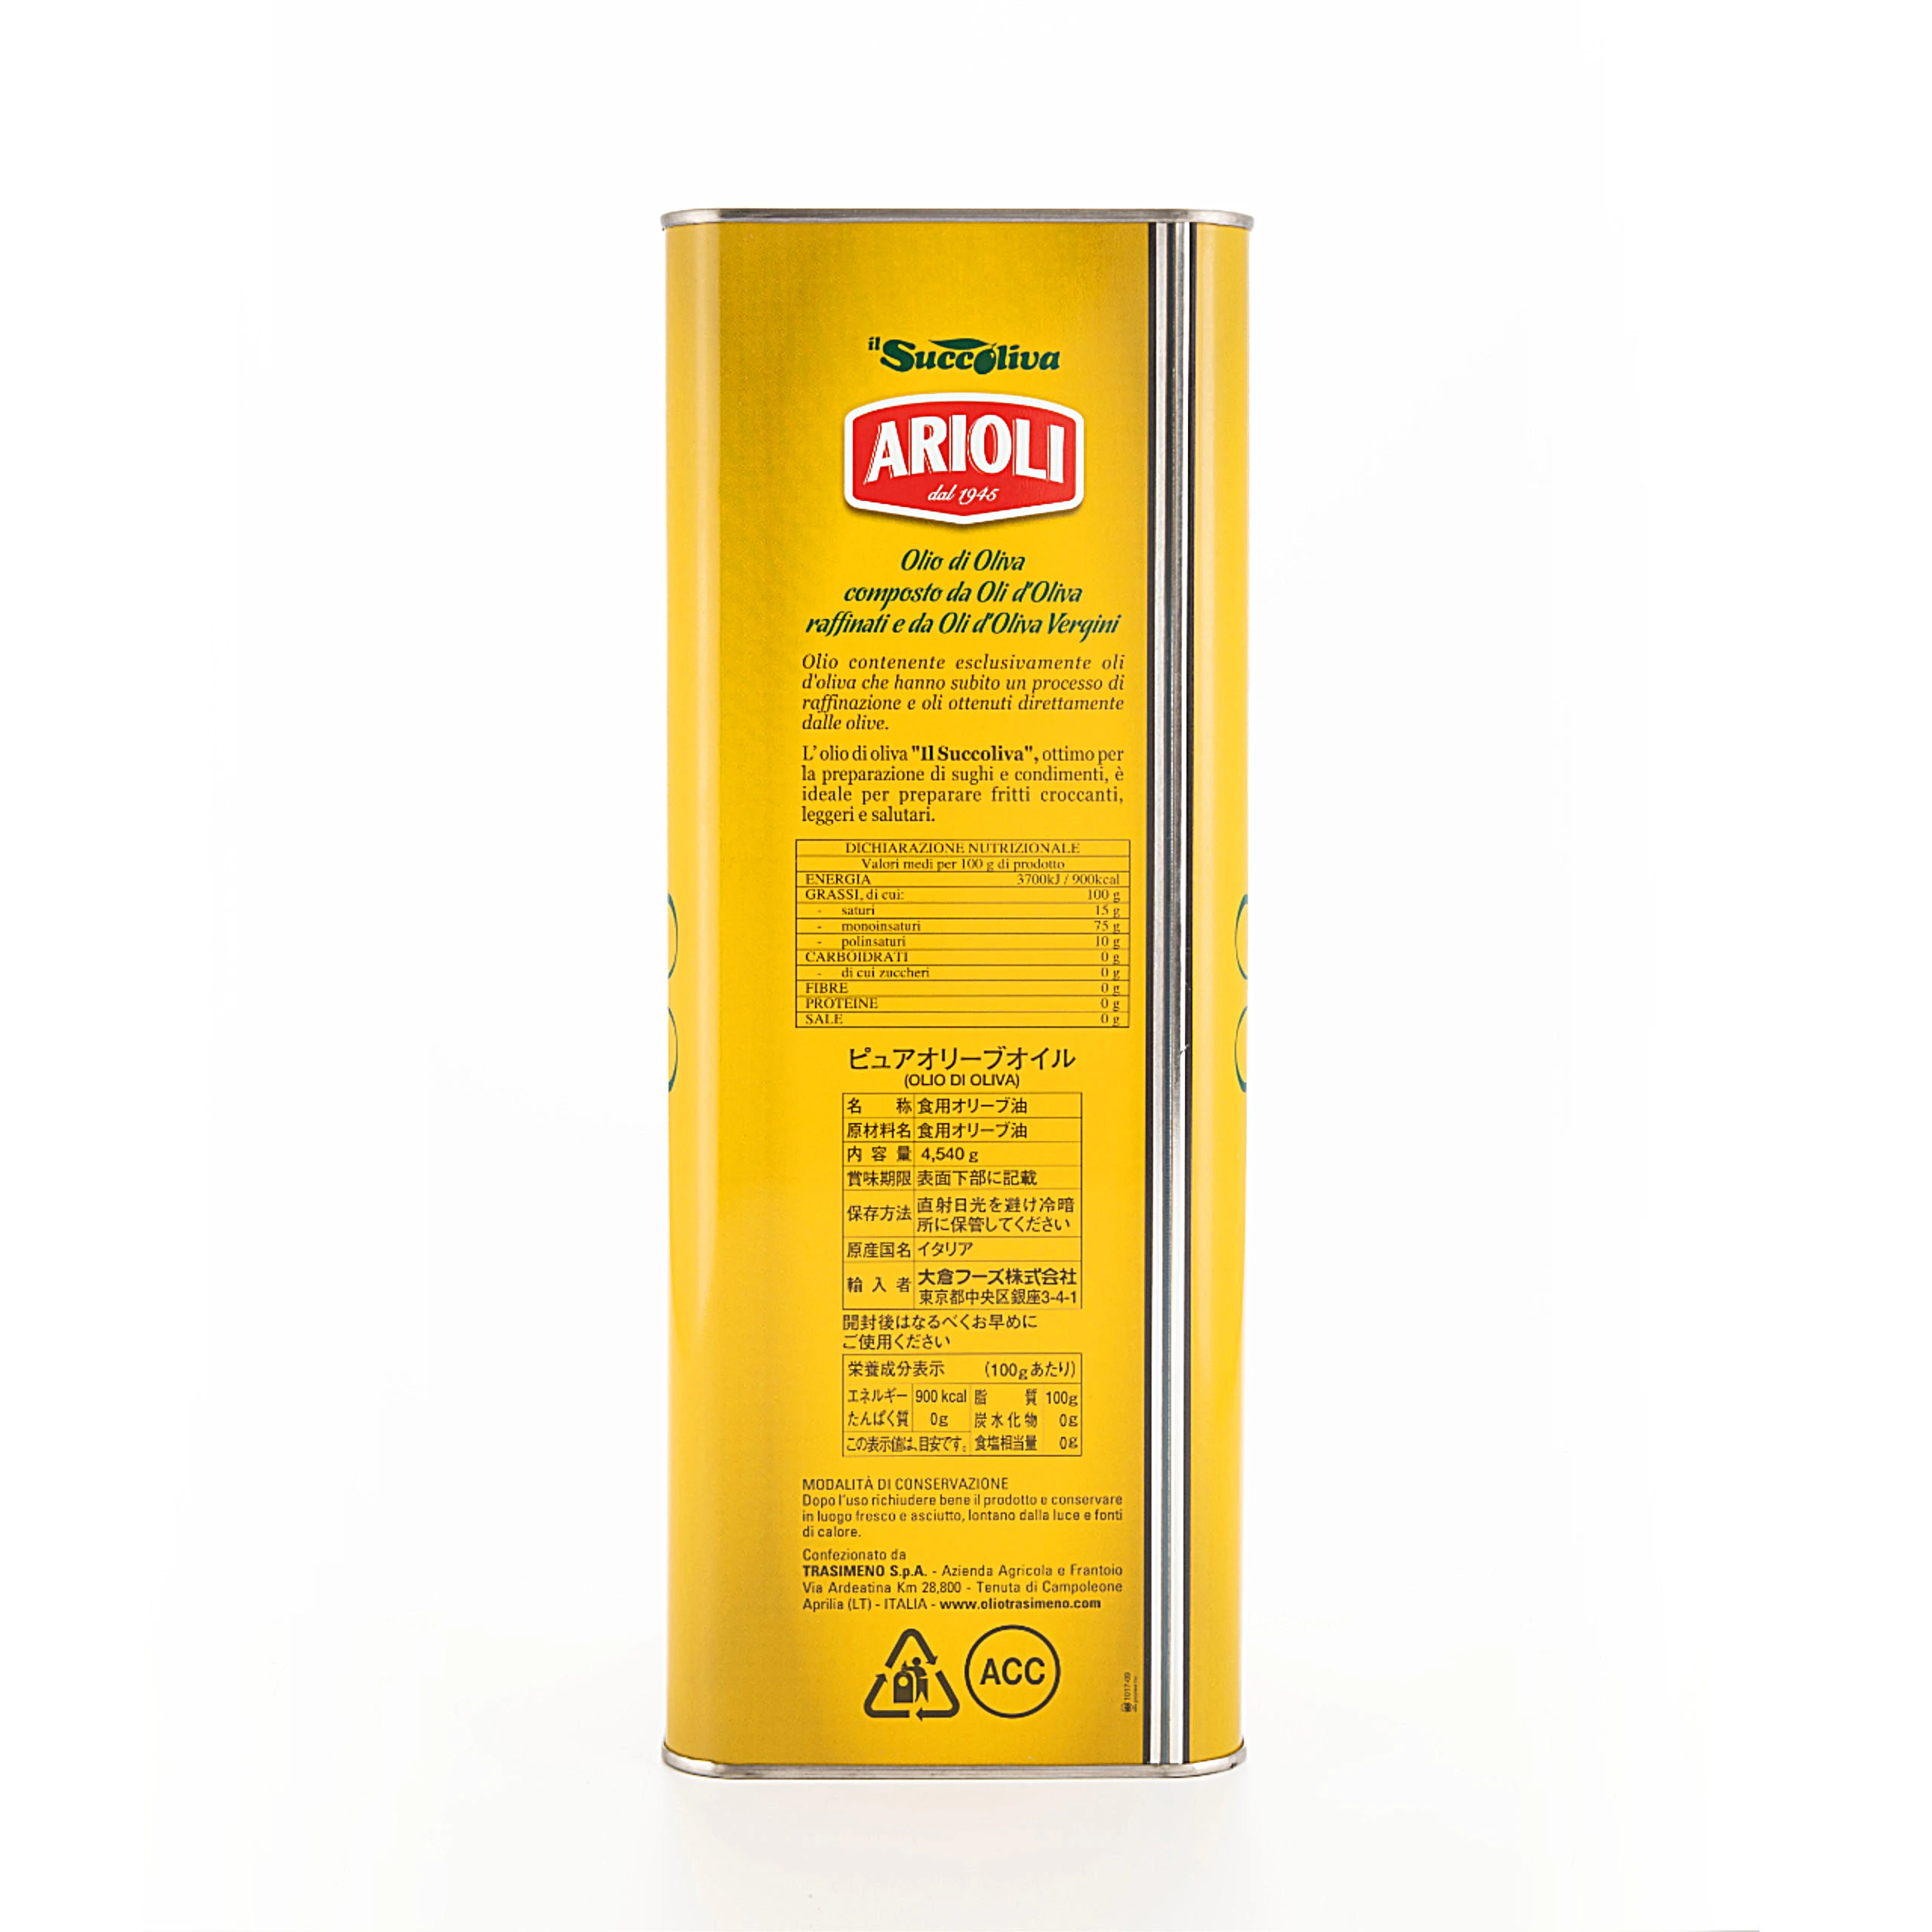 Good Quality Pure Olive Oil Kosher Certified ARIOLI IL SUCCOLIVA 5Lt. Tin for Ho.Re.Ca